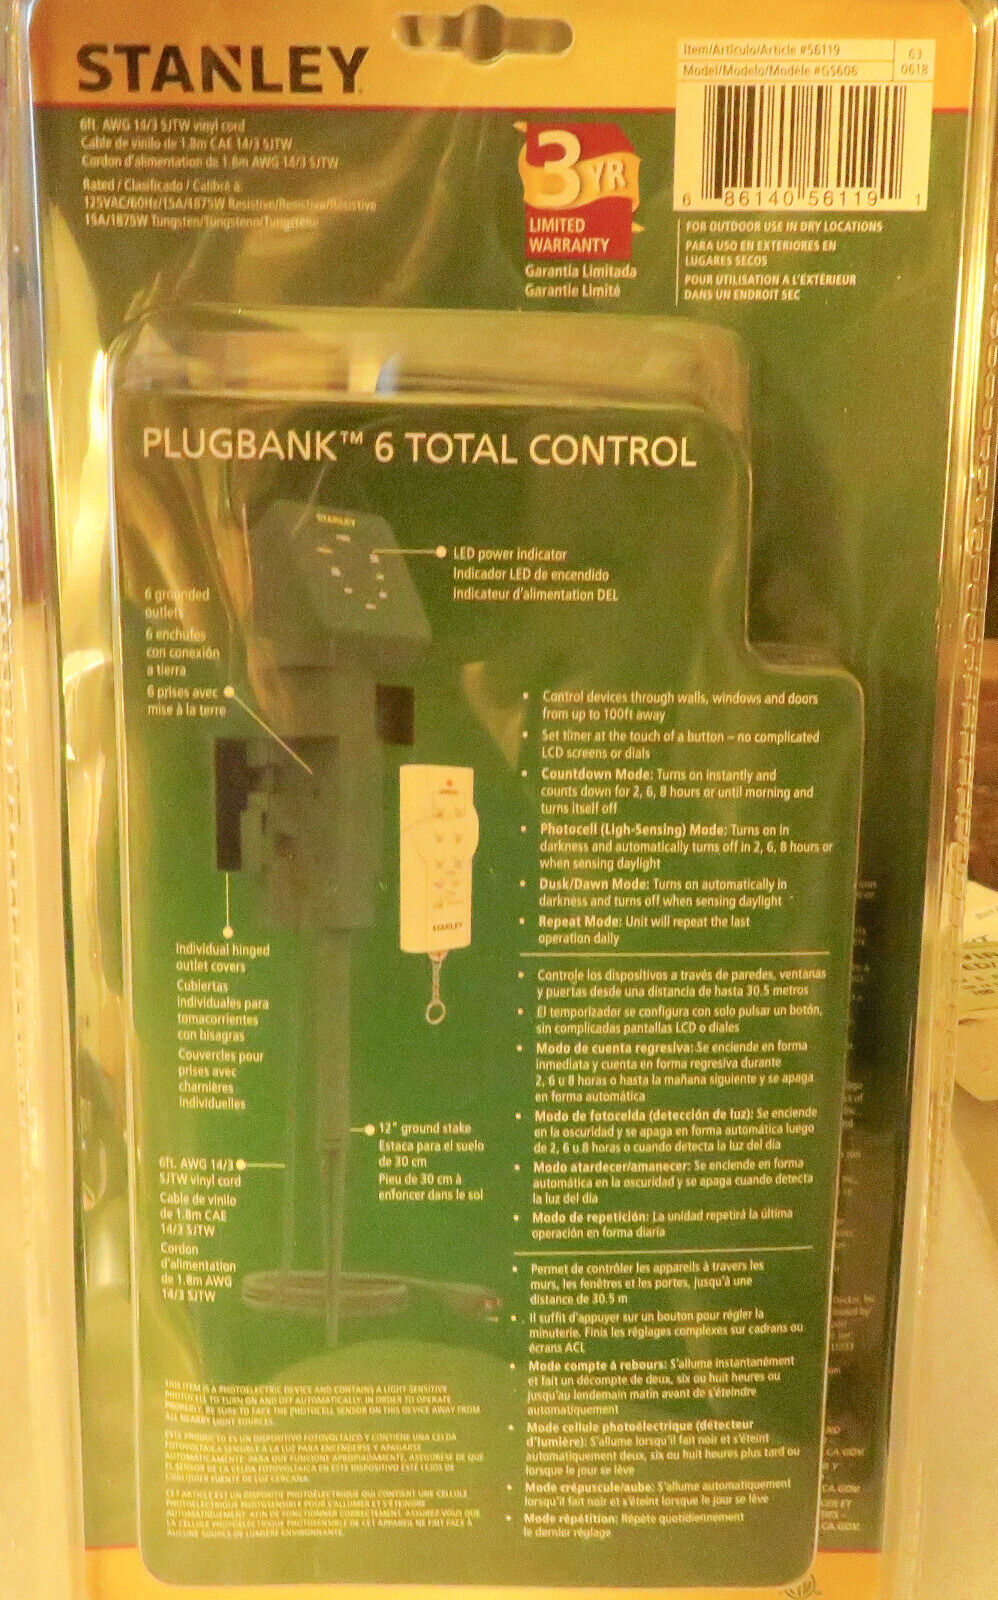 Stanley PLUGBANK 6 TOTAL CONTROL: (GS606) 6 Outlet Photocell, Timer, and Remote